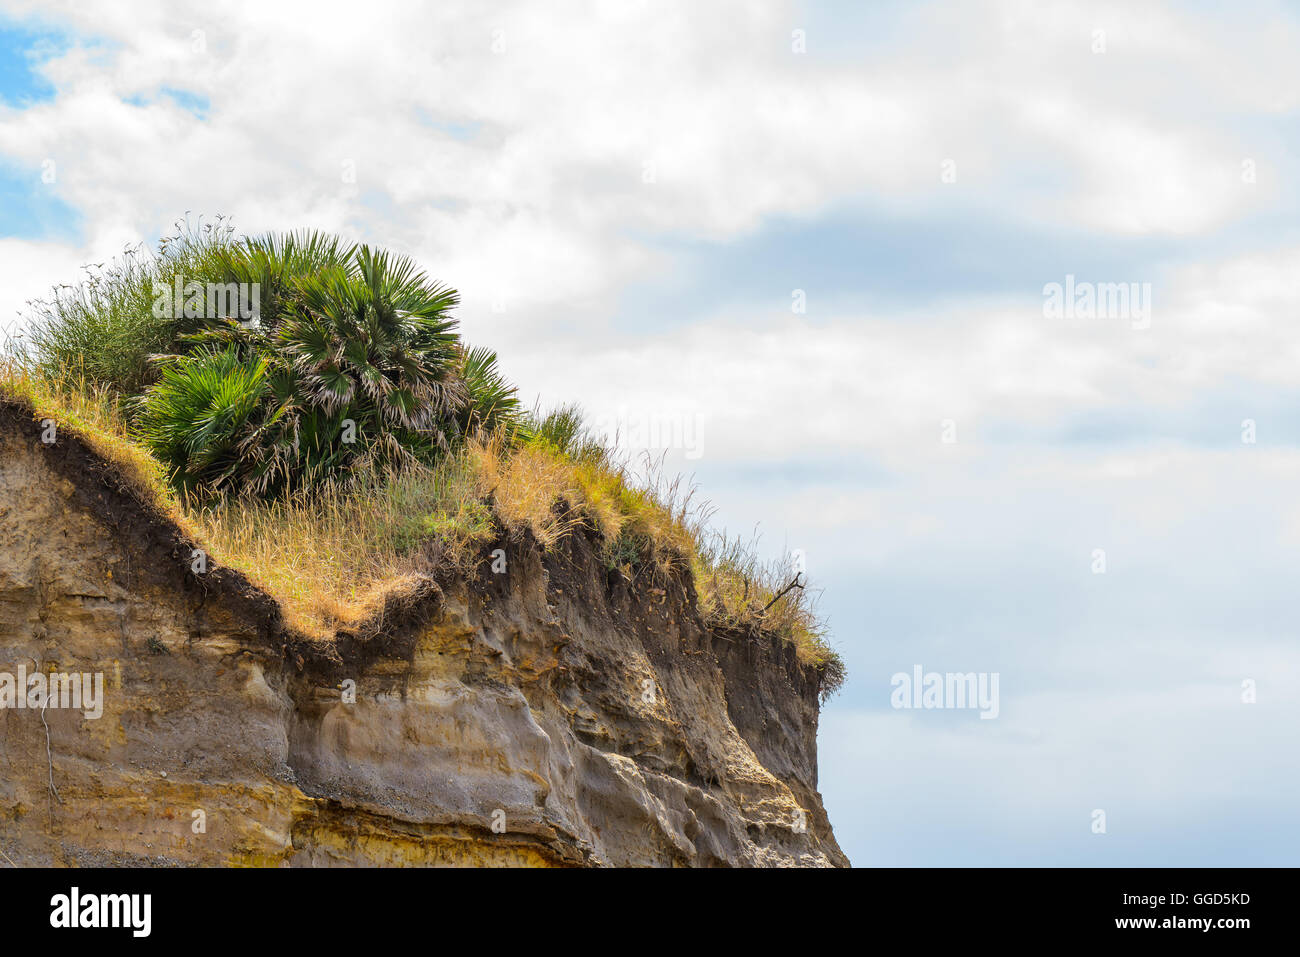 sedimentary rock with plants and cloudly blue sky Stock Photo